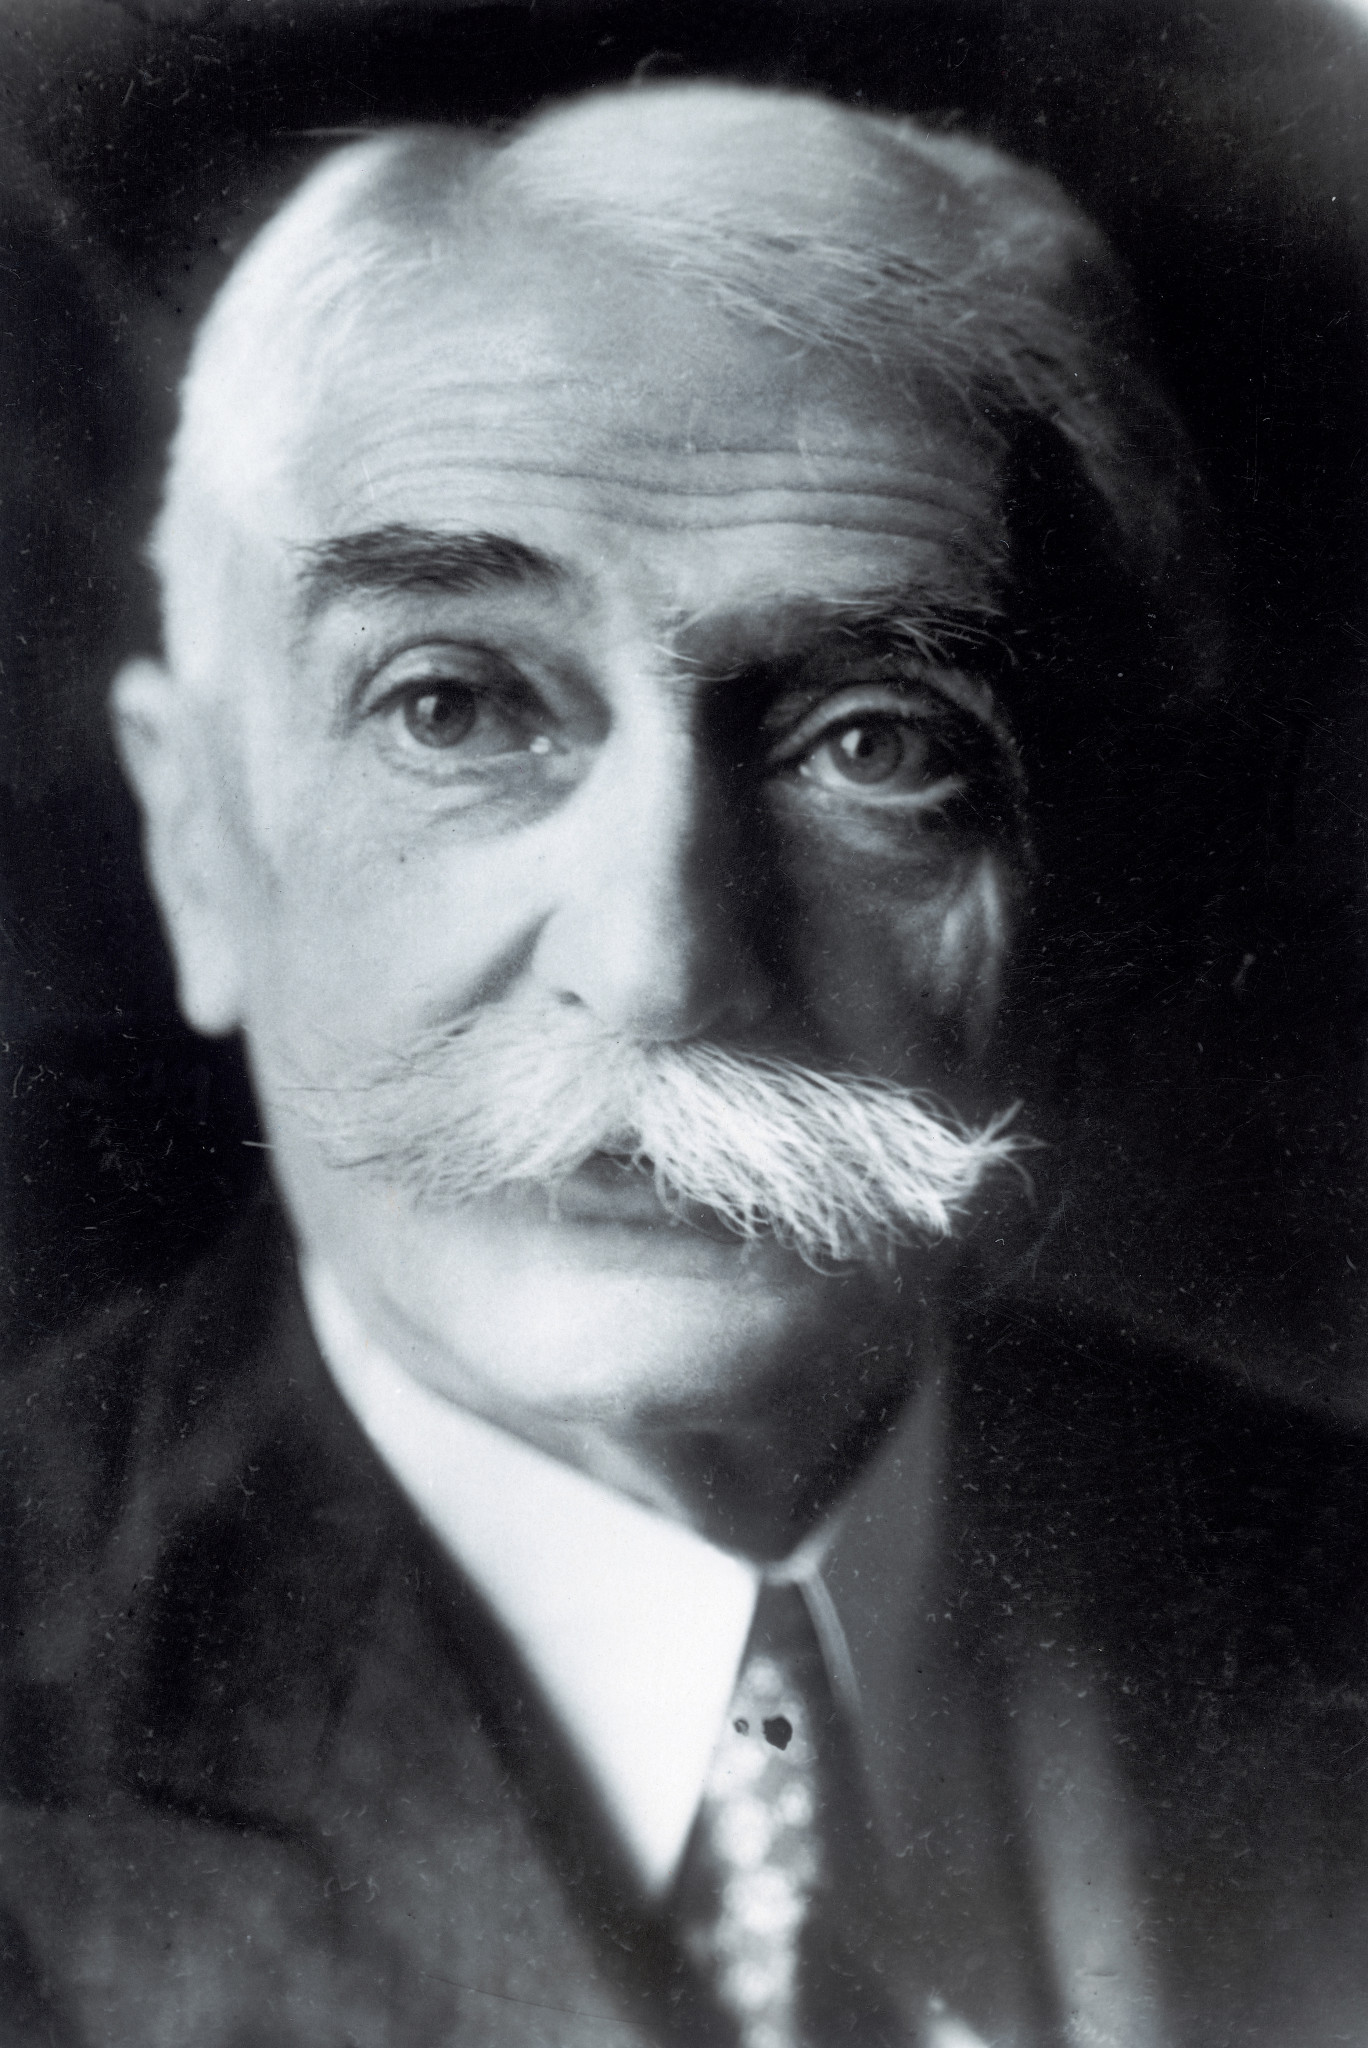 Pierre de Coubertin, founder of the International Olympic Committee, ran the organisation from his family home, with a lot of business conducted by letters ©Getty Images